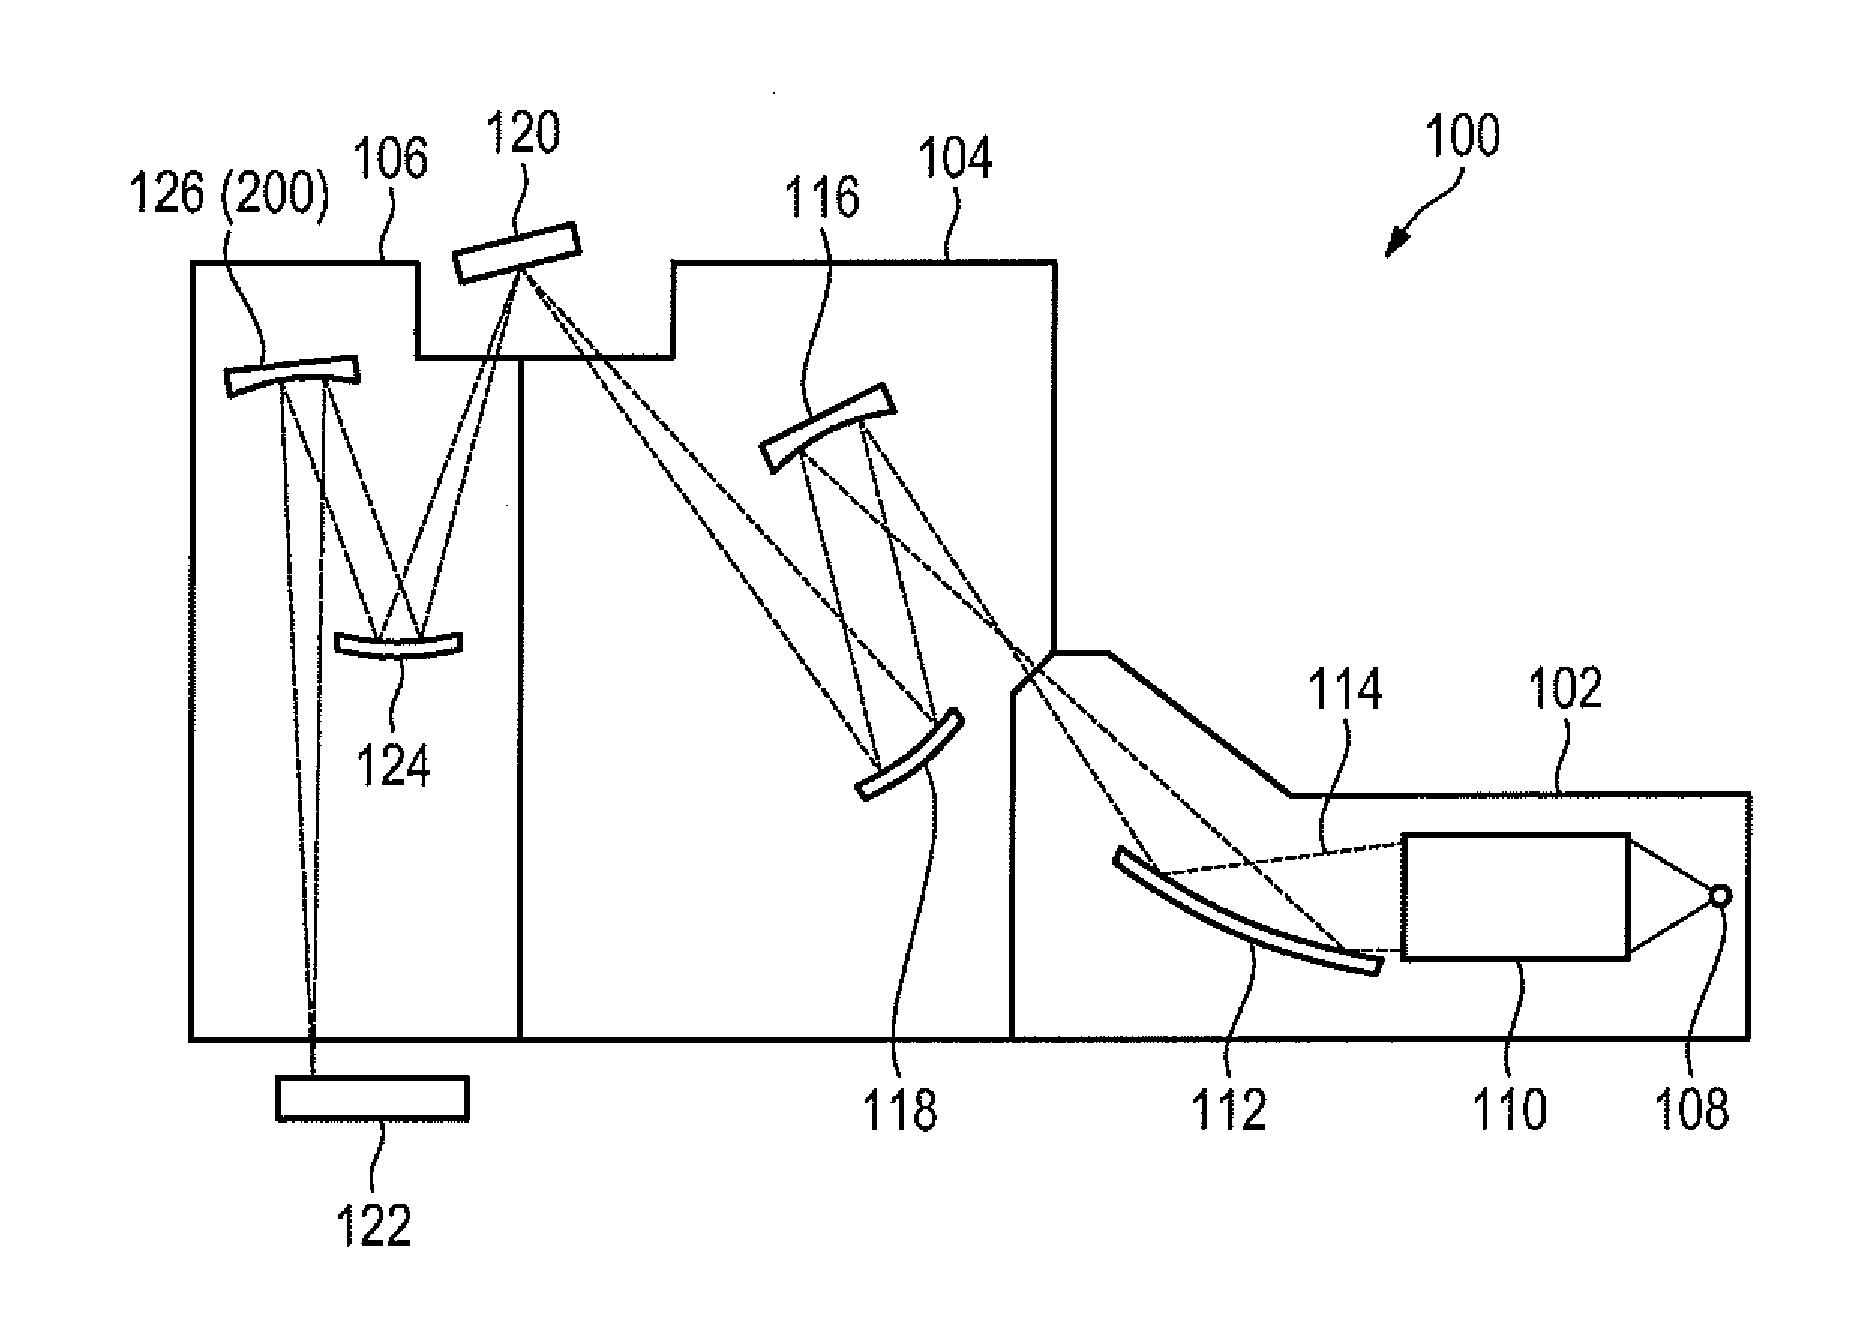 Lithography apparatus with segmented mirror